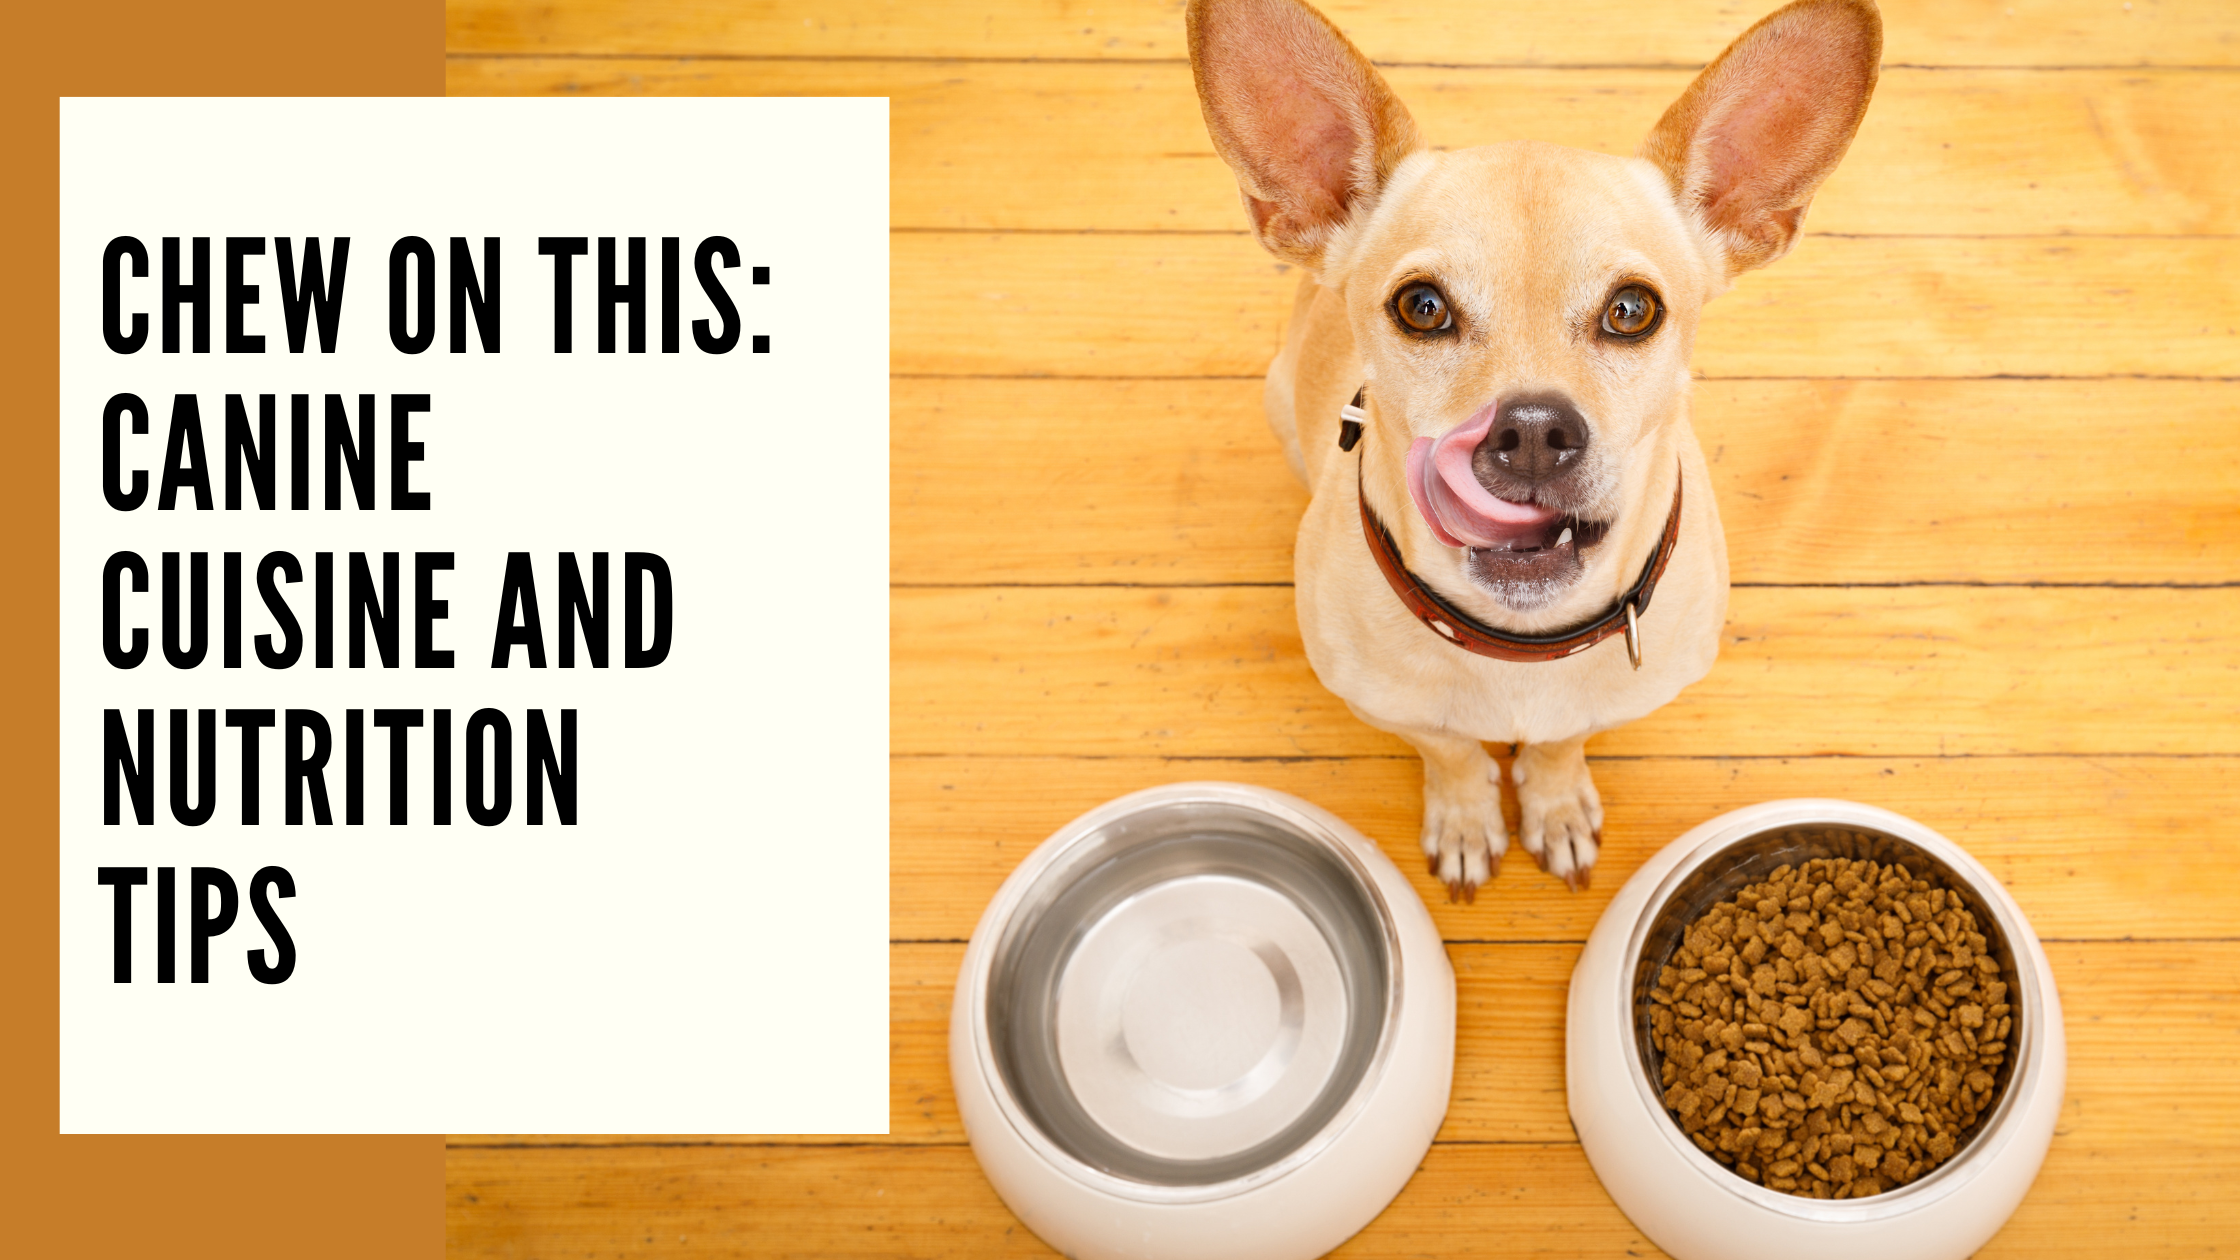 Chew on This Canine Cuisine and Nutrition Tips